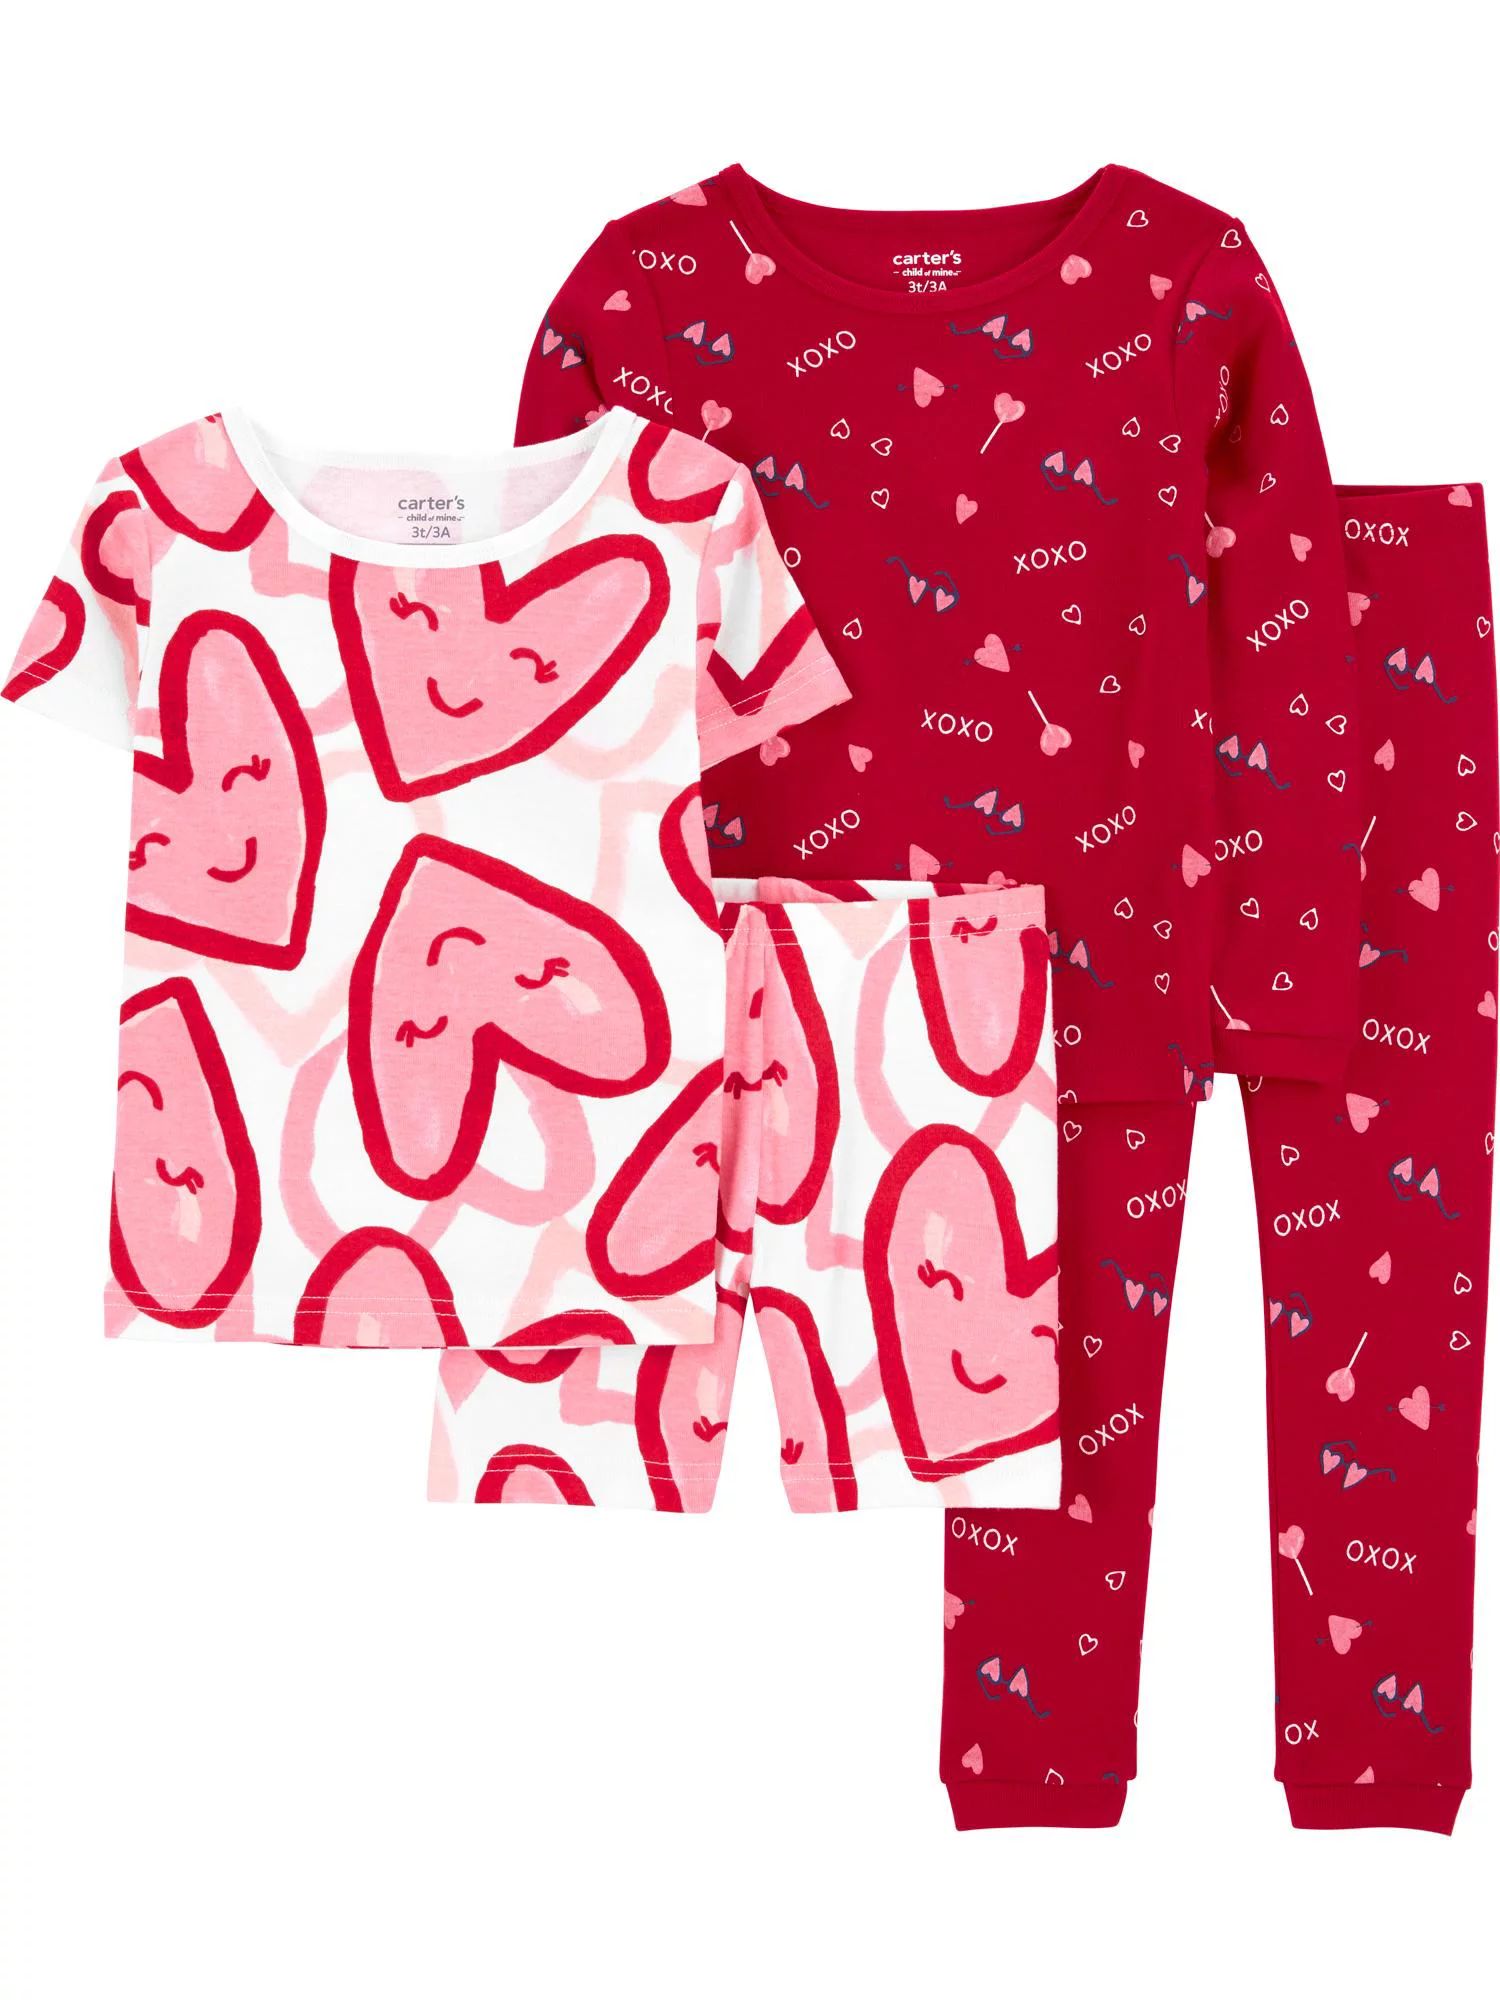 Carter's Child of Mine Baby and Toddler Girl Valentine's Day Pajama Set, 4-Piece, Sizes 12M-5T - ... | Walmart (US)